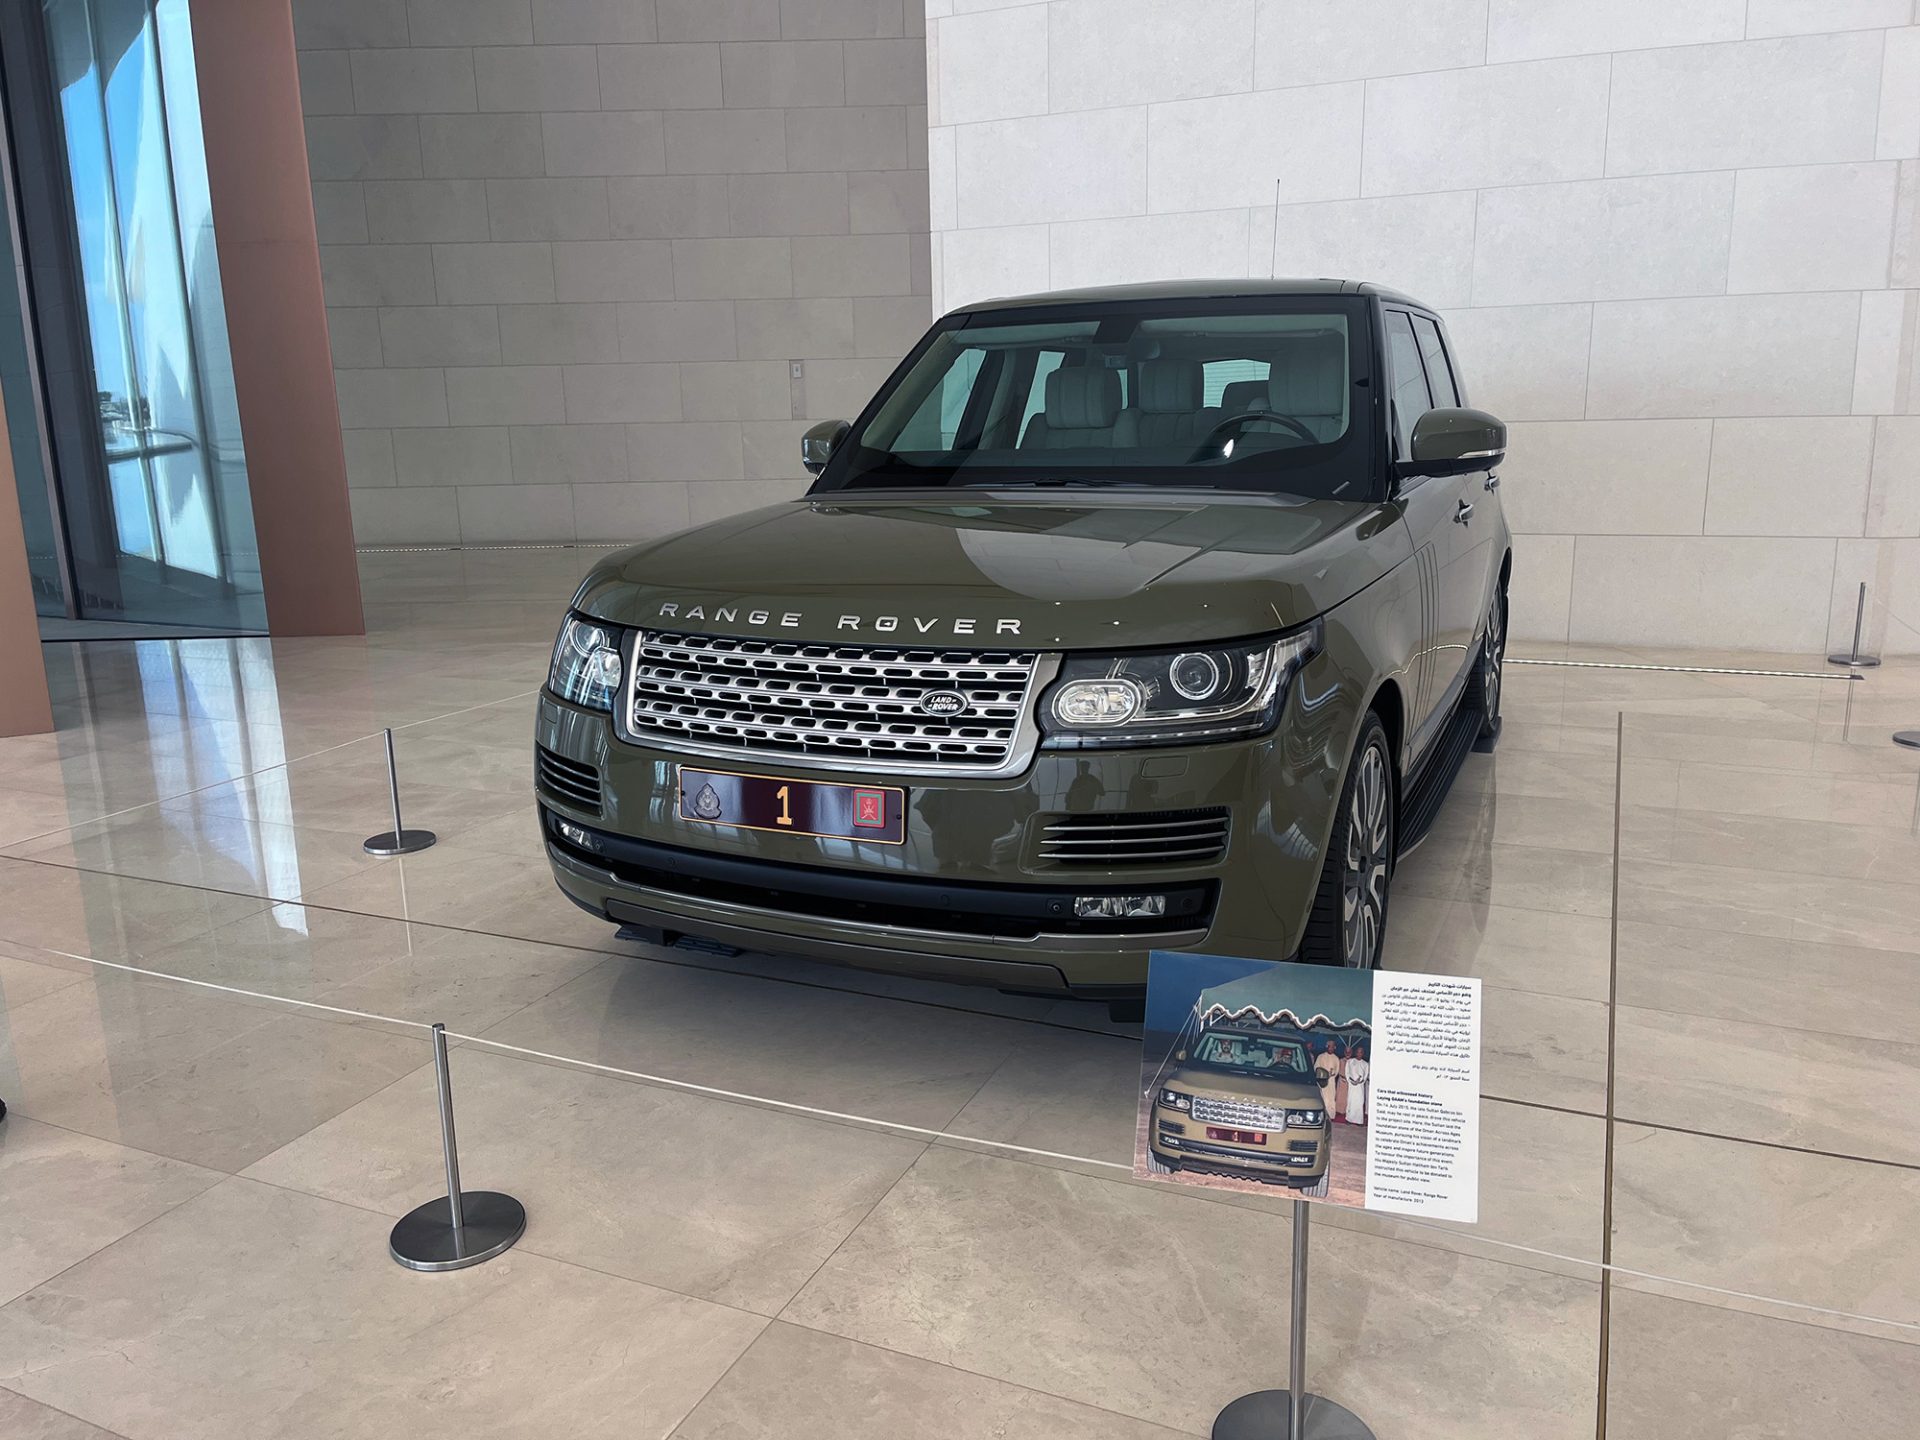 The Range Rover of the Omani Royal Family.